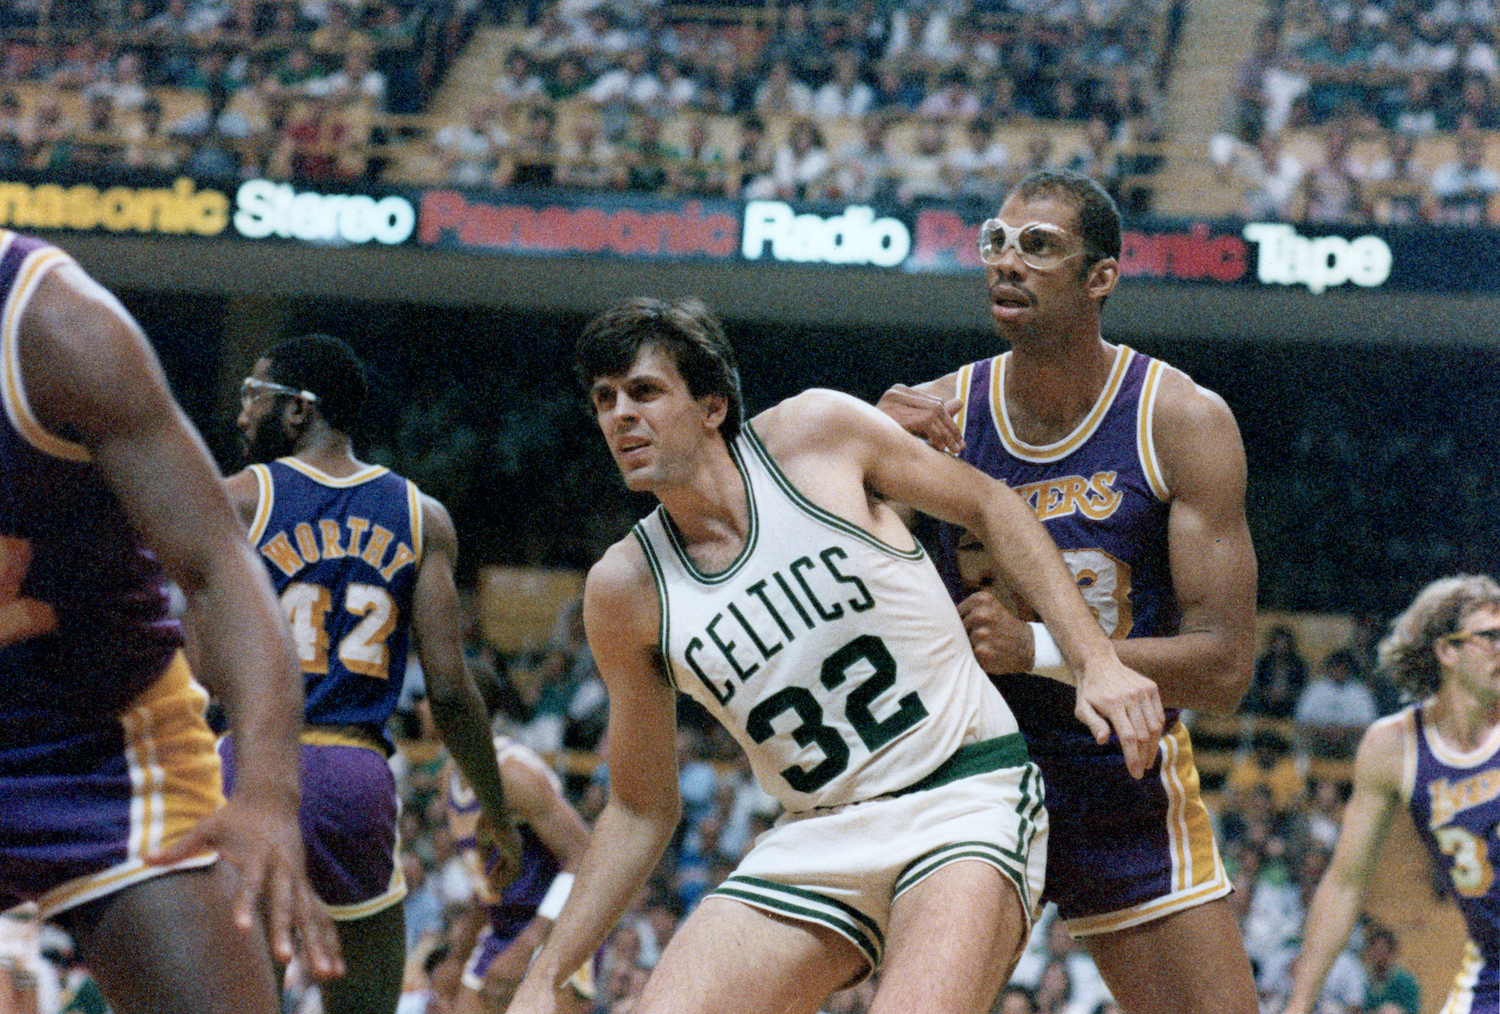 Boston Celtics forward Kevin McHale attempts to defend Kareem Abdul-Jabbar in the low post.